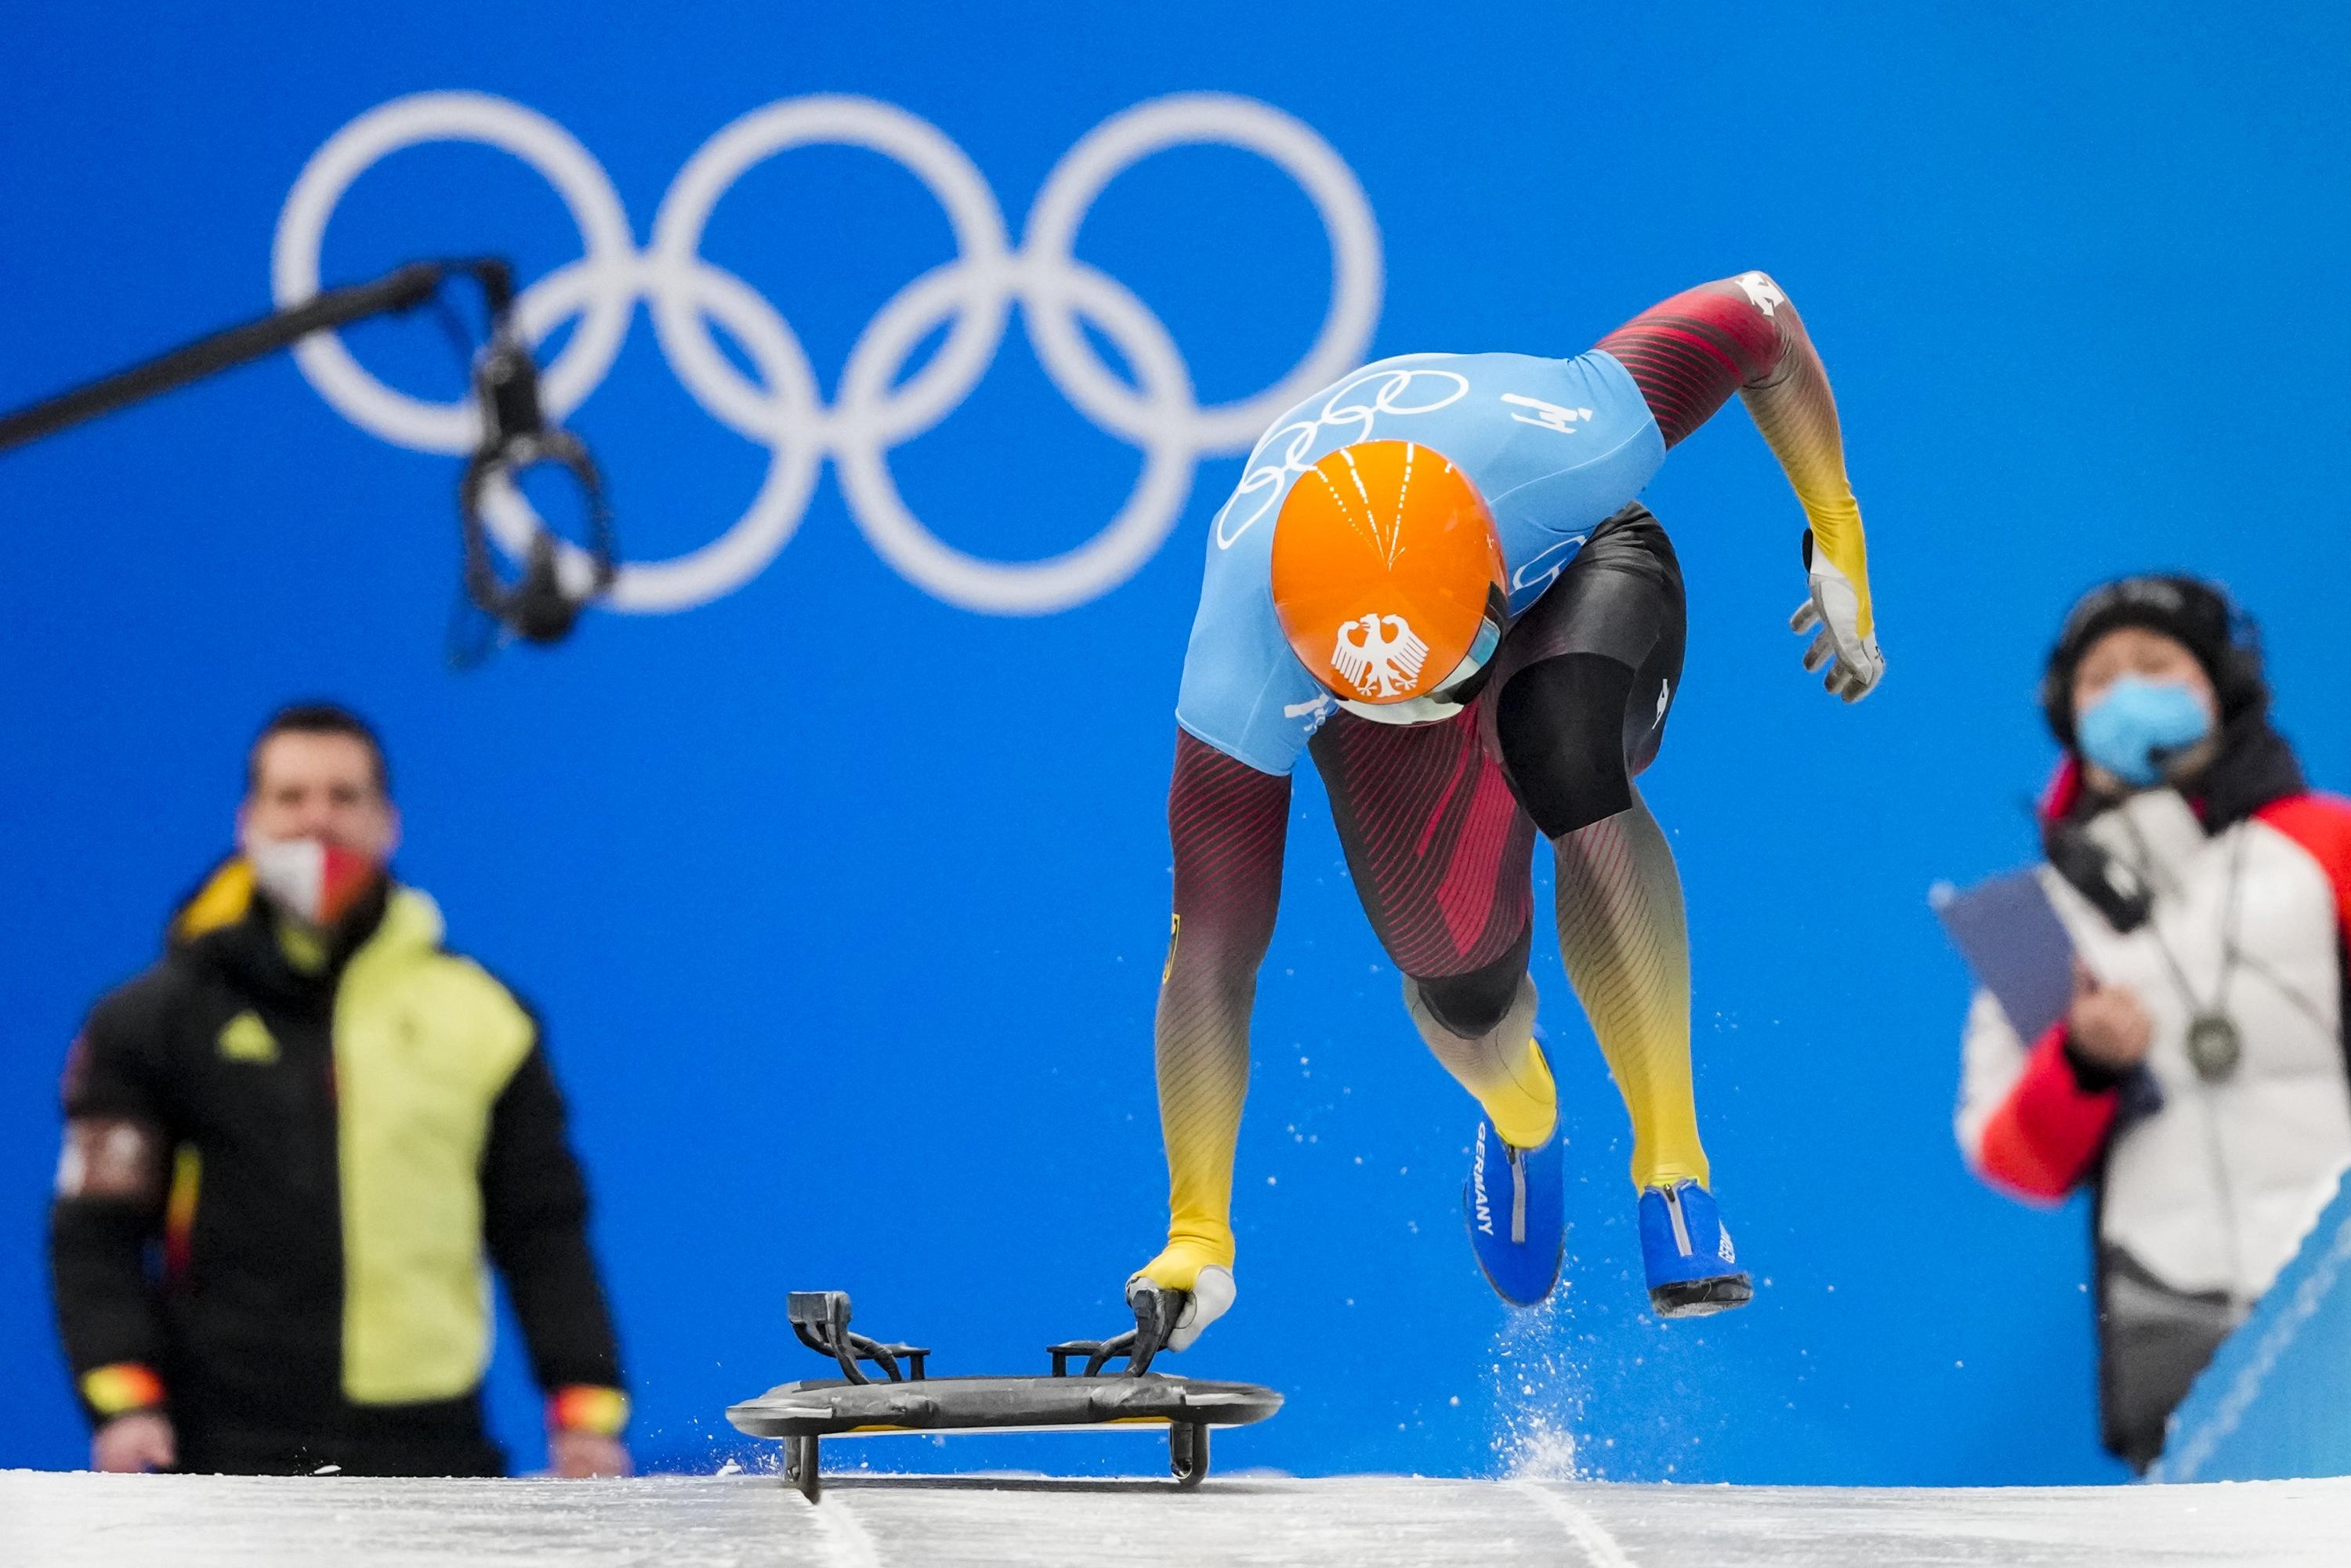 Christopher Grotheer, Germany another Olympic, Sliding gold medal, AP news, 3000x2010 HD Desktop